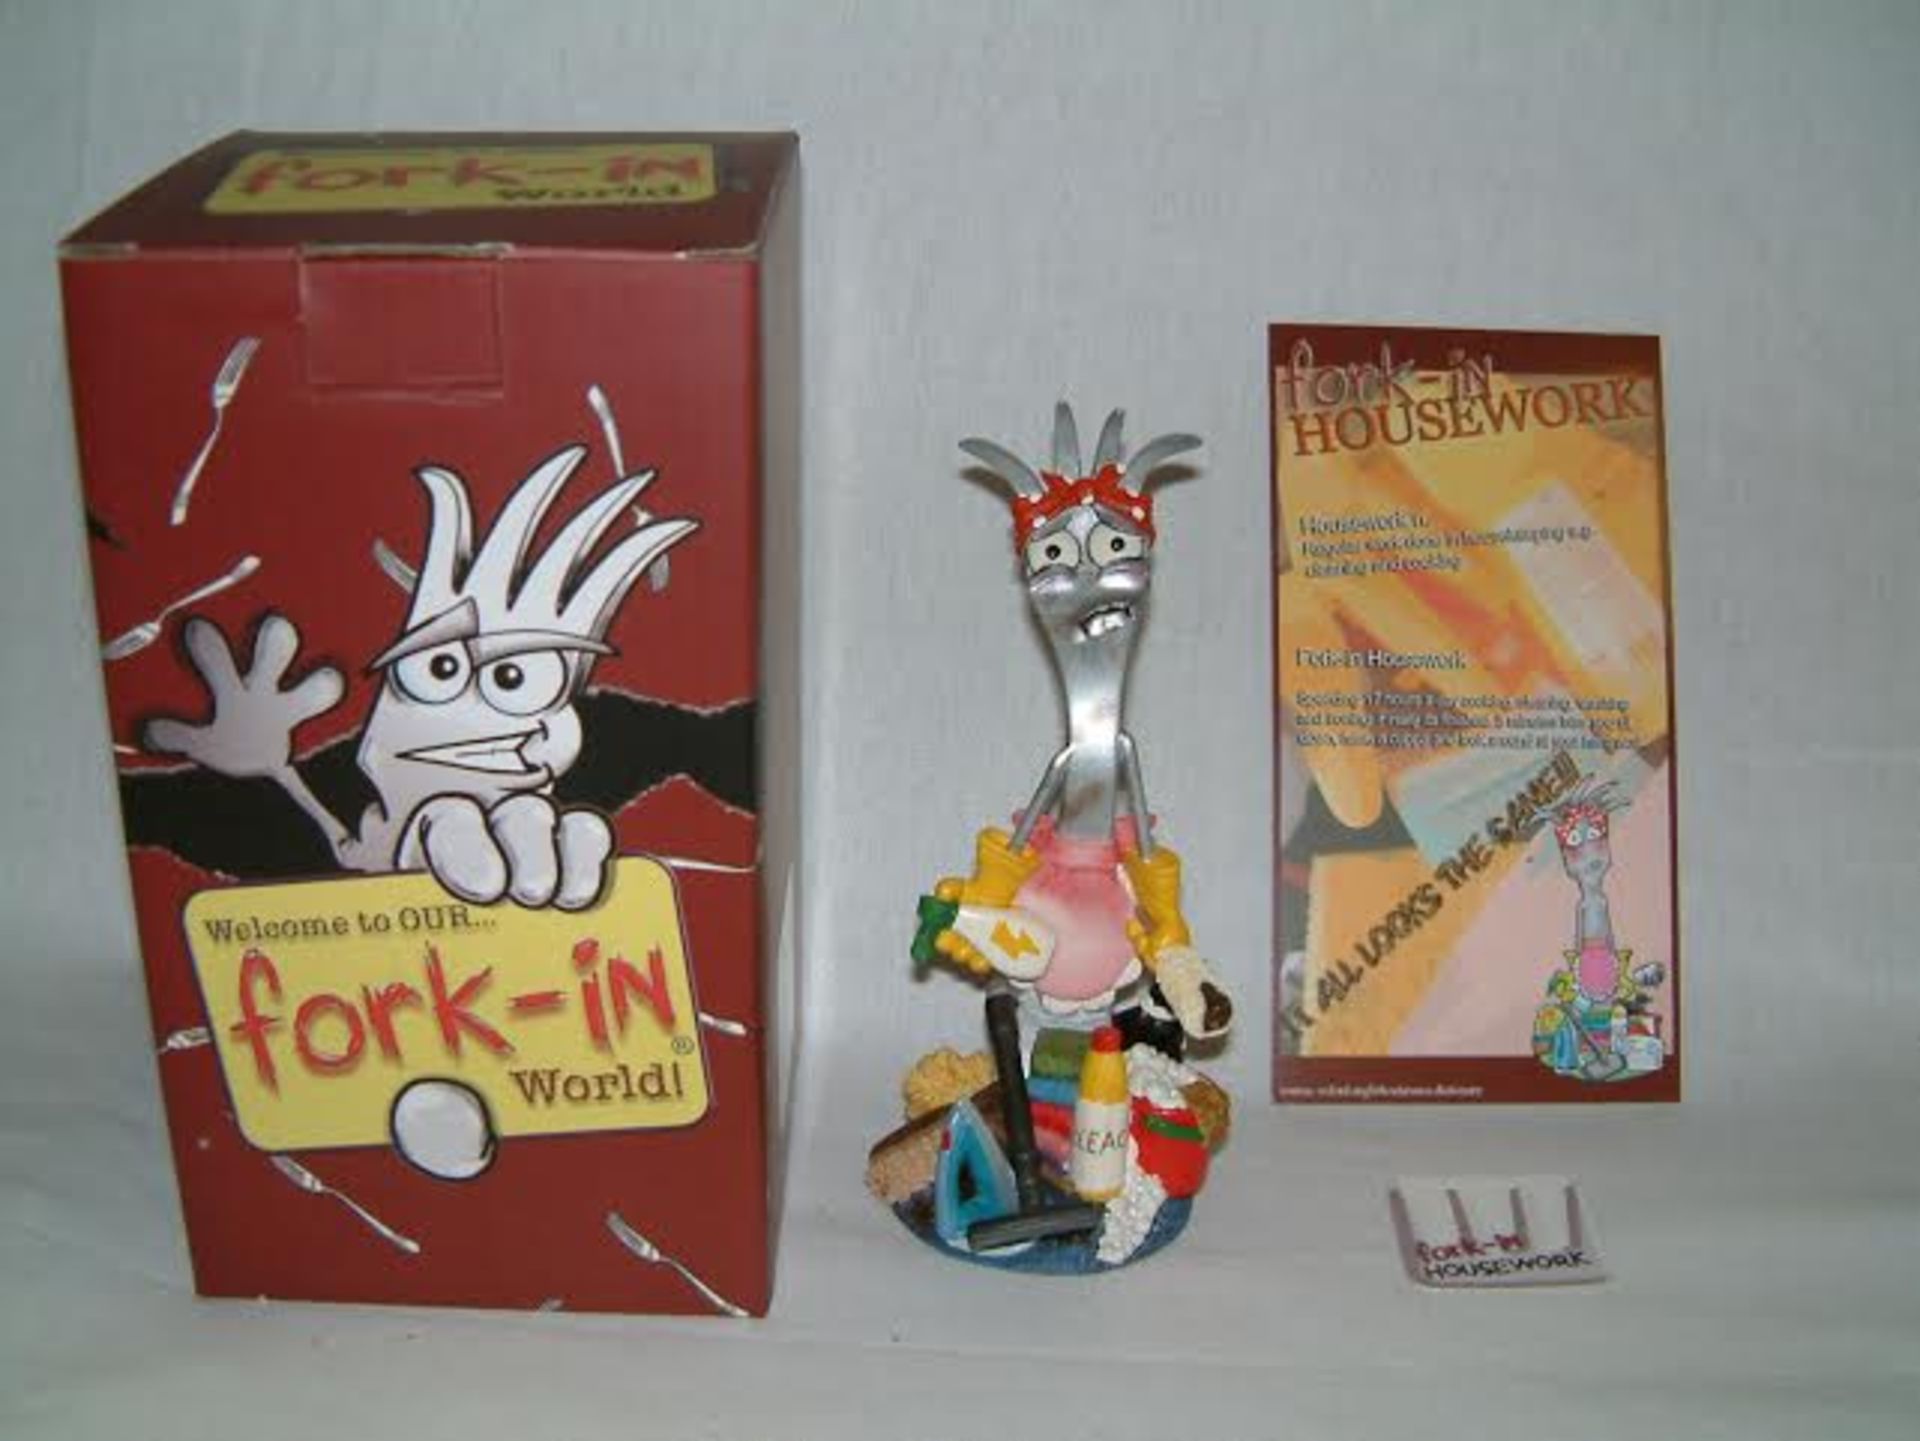 40x ‘Housework’ Fork-In Novelty Figures. All are made from resin and hand painted. Rrp is £14.99.